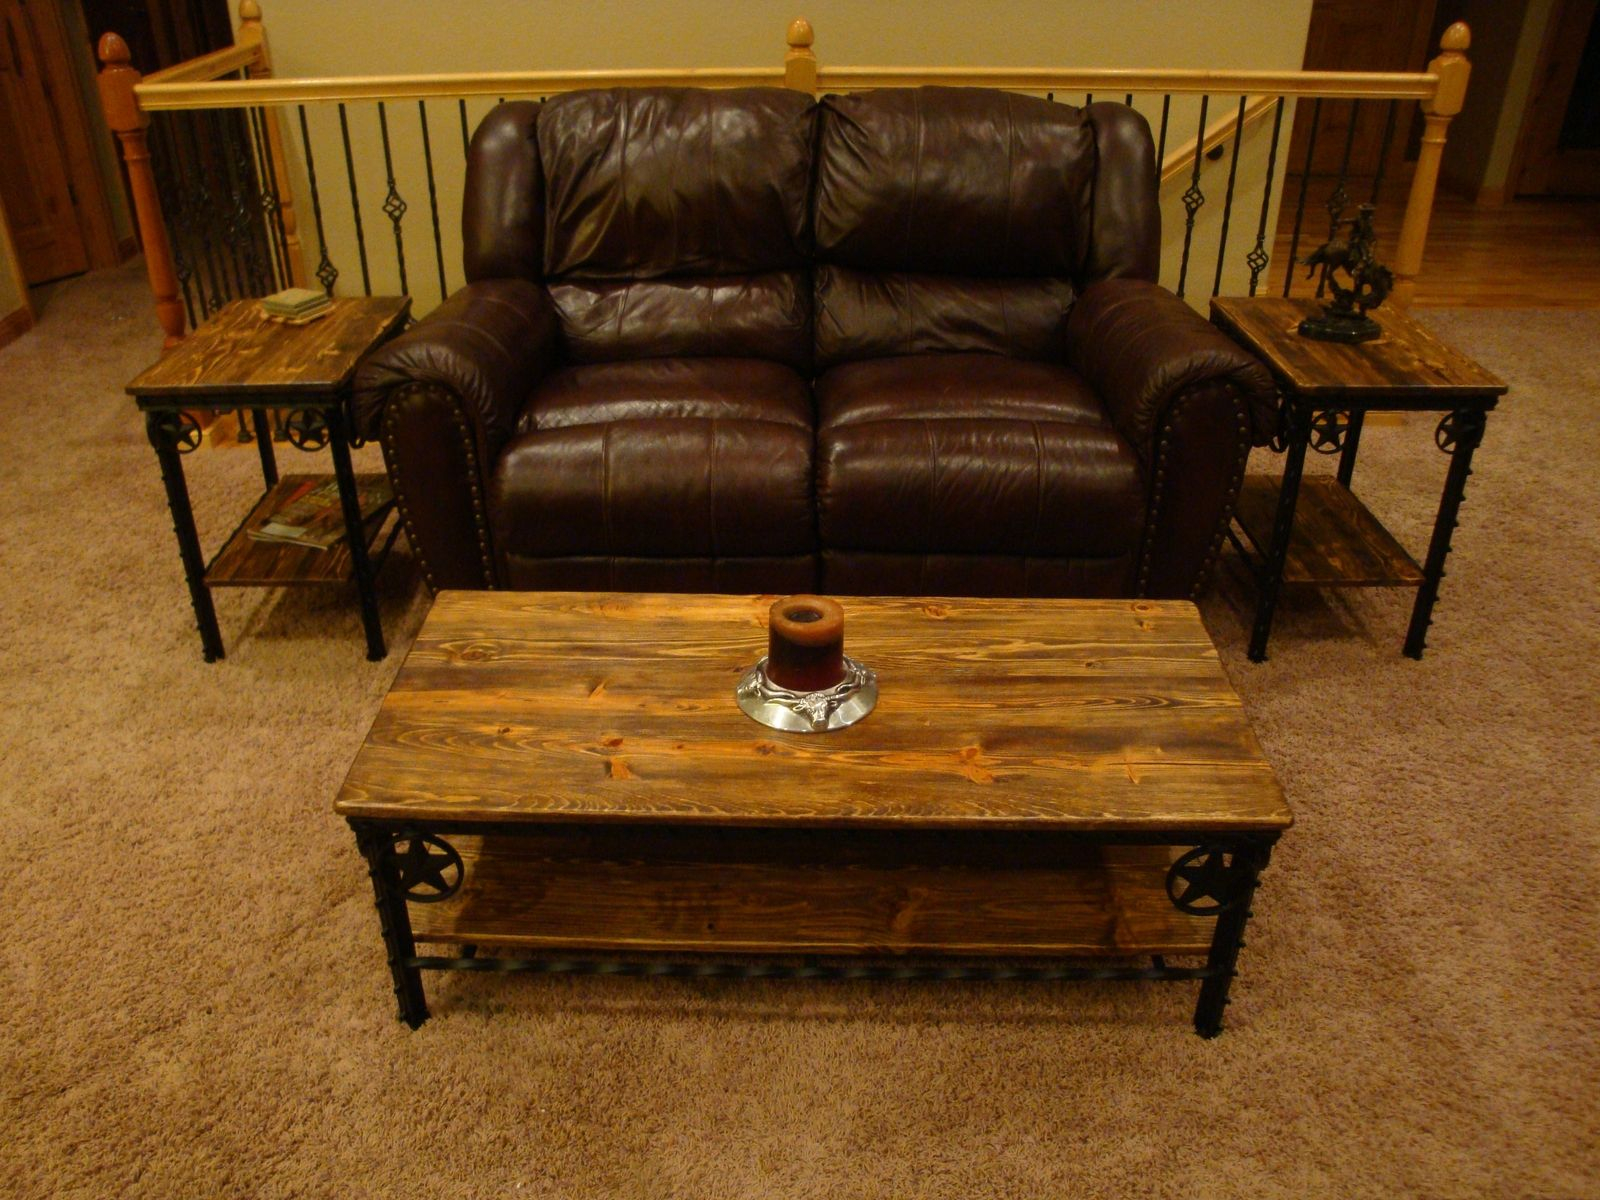 Handmade Western Coffee Table And End Tables Willow Creek Decor throughout sizing 1600 X 1200